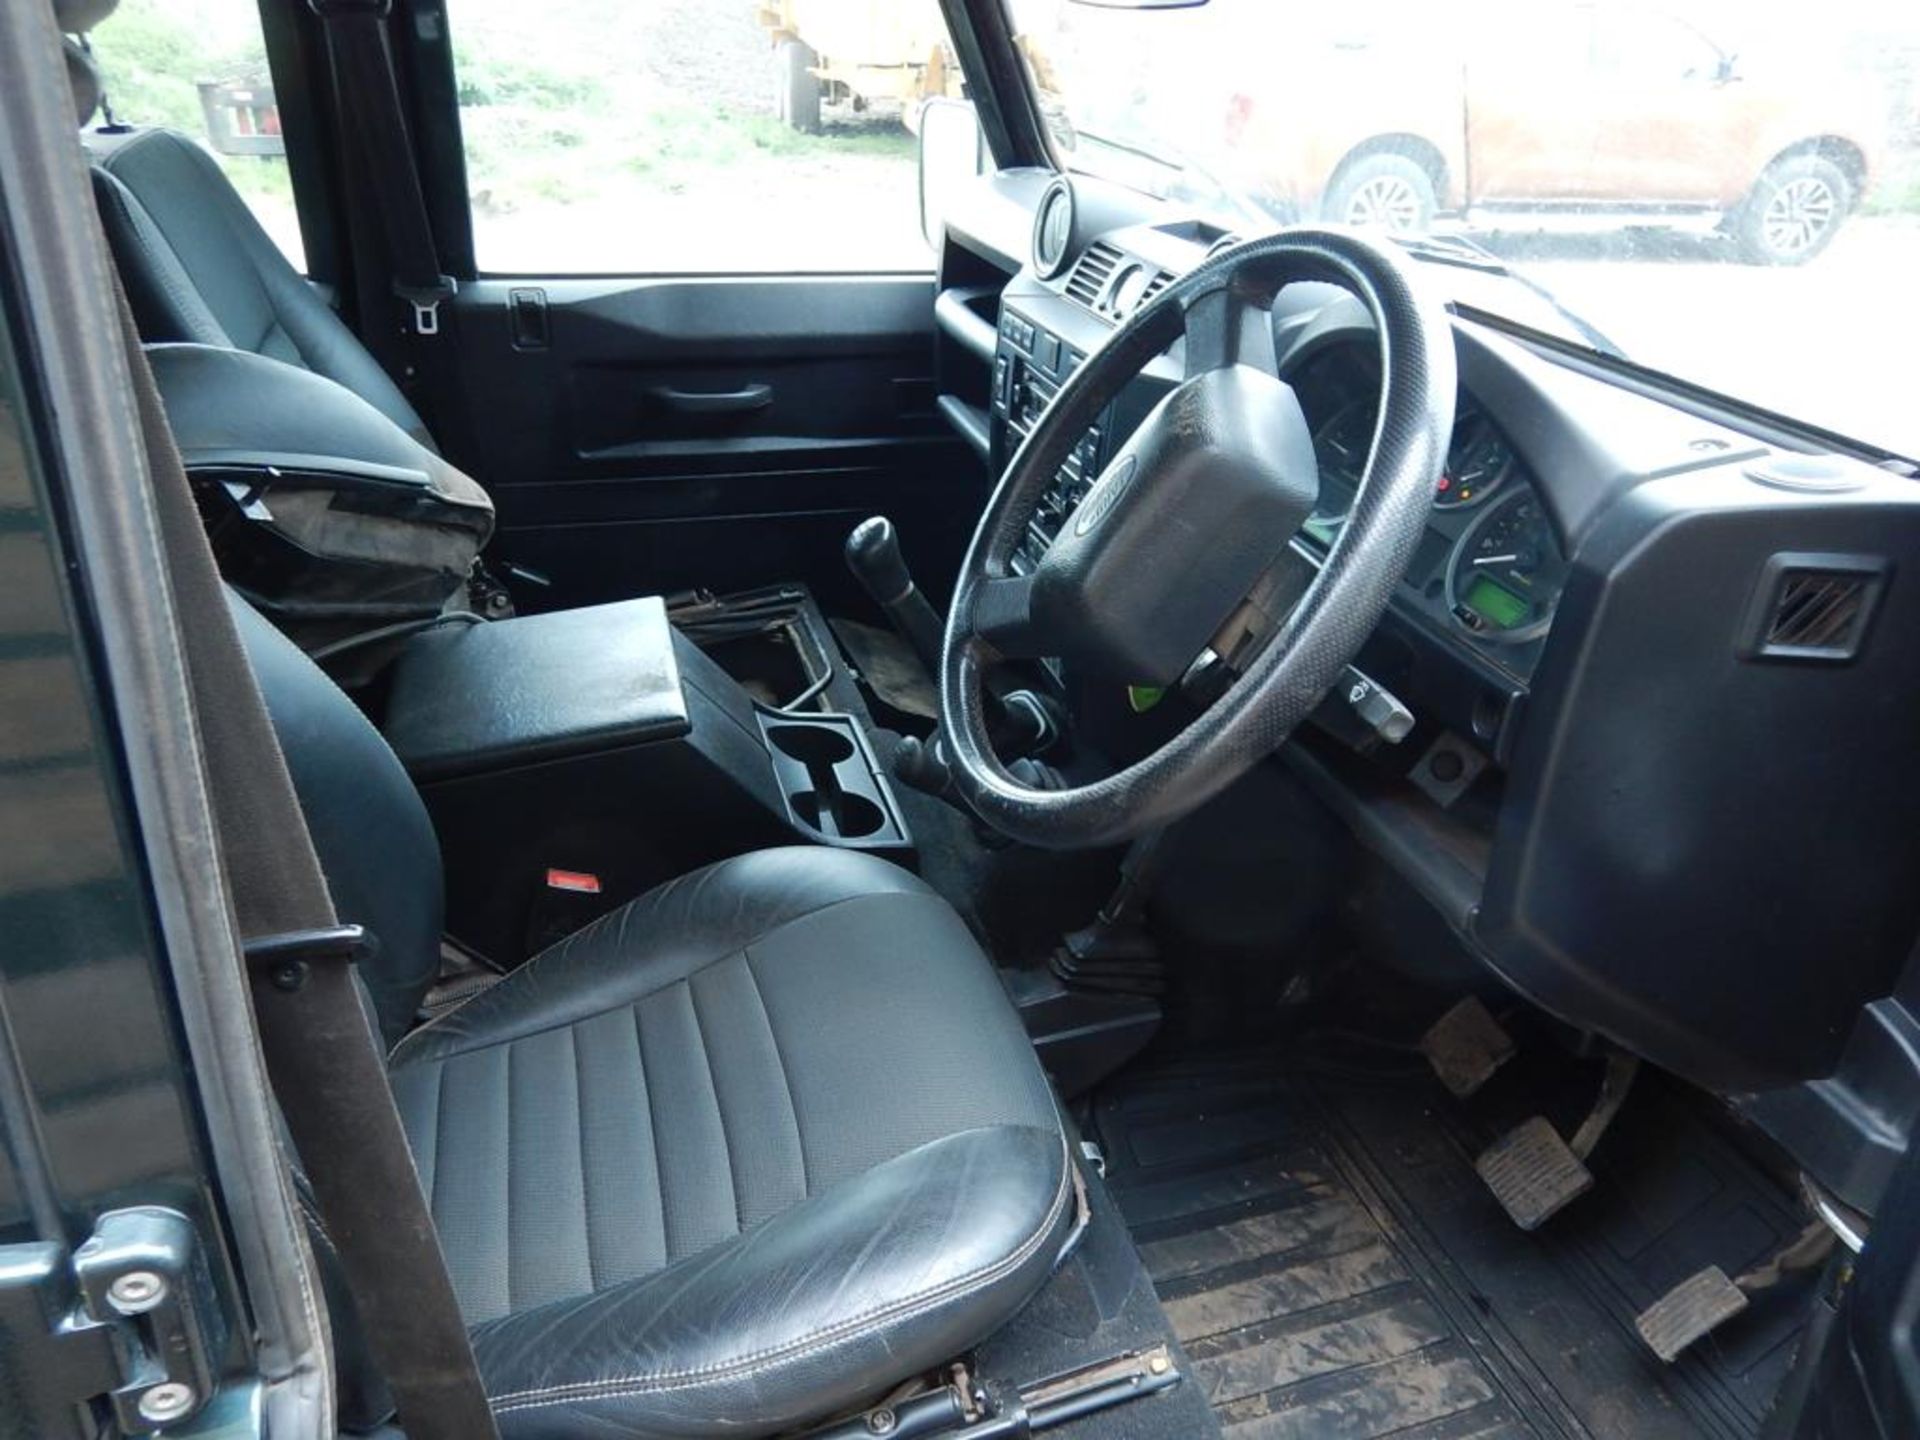 Land Rover Defender 110 XS 2.4L TDCi manual twin cab with half leather seats, air conditioning, - Image 4 of 8